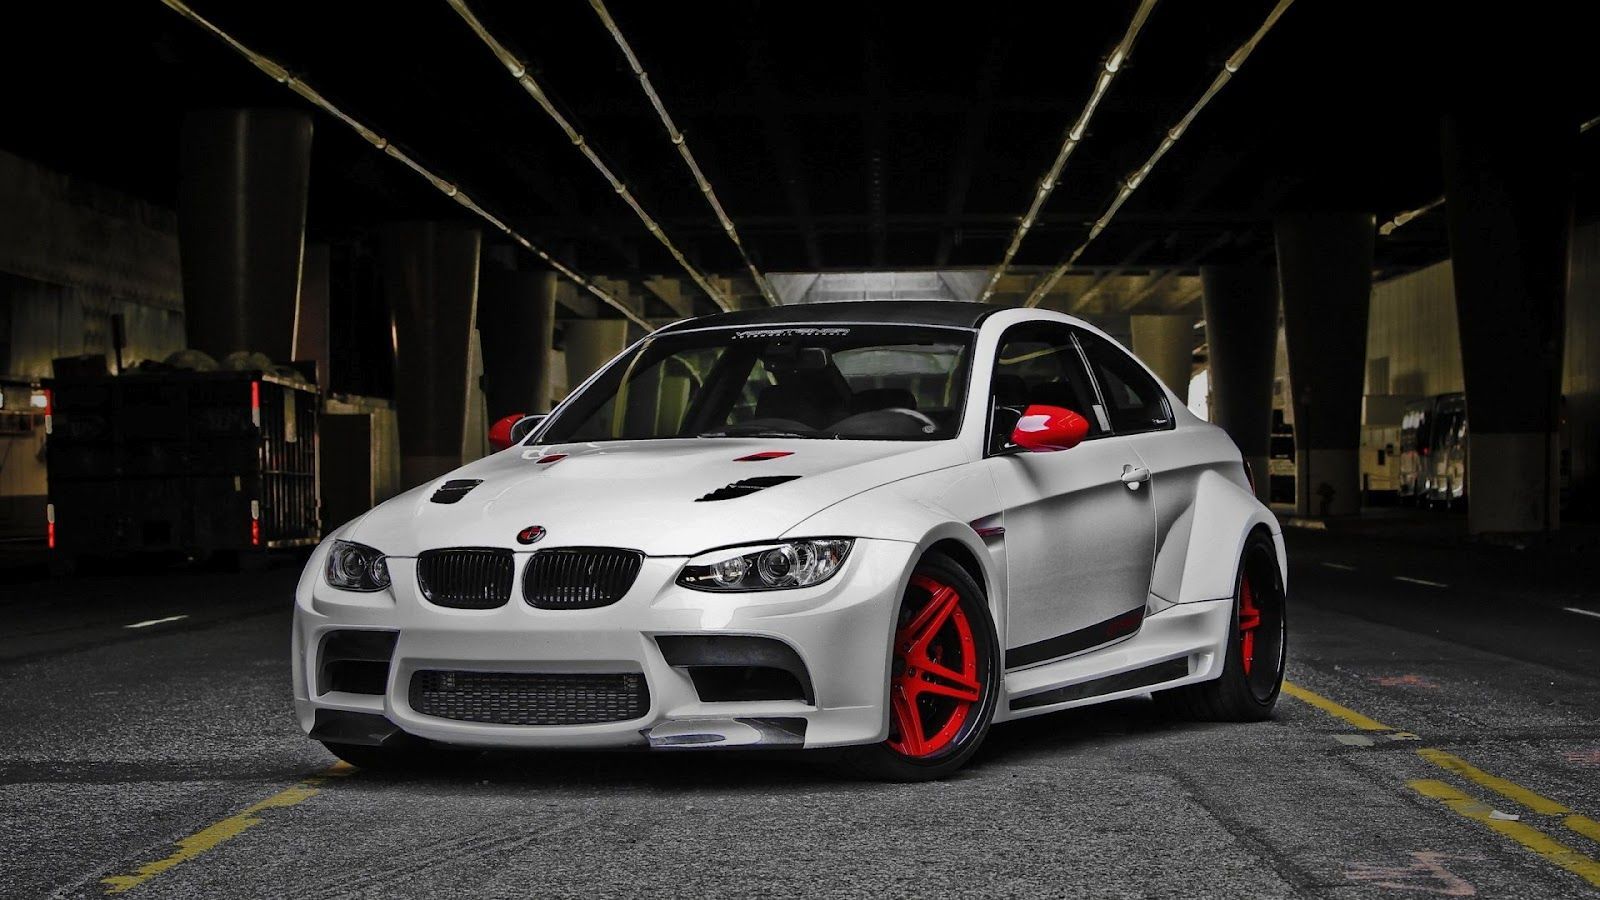 BMW M3 Series Wallpaper | Full HD Pictures